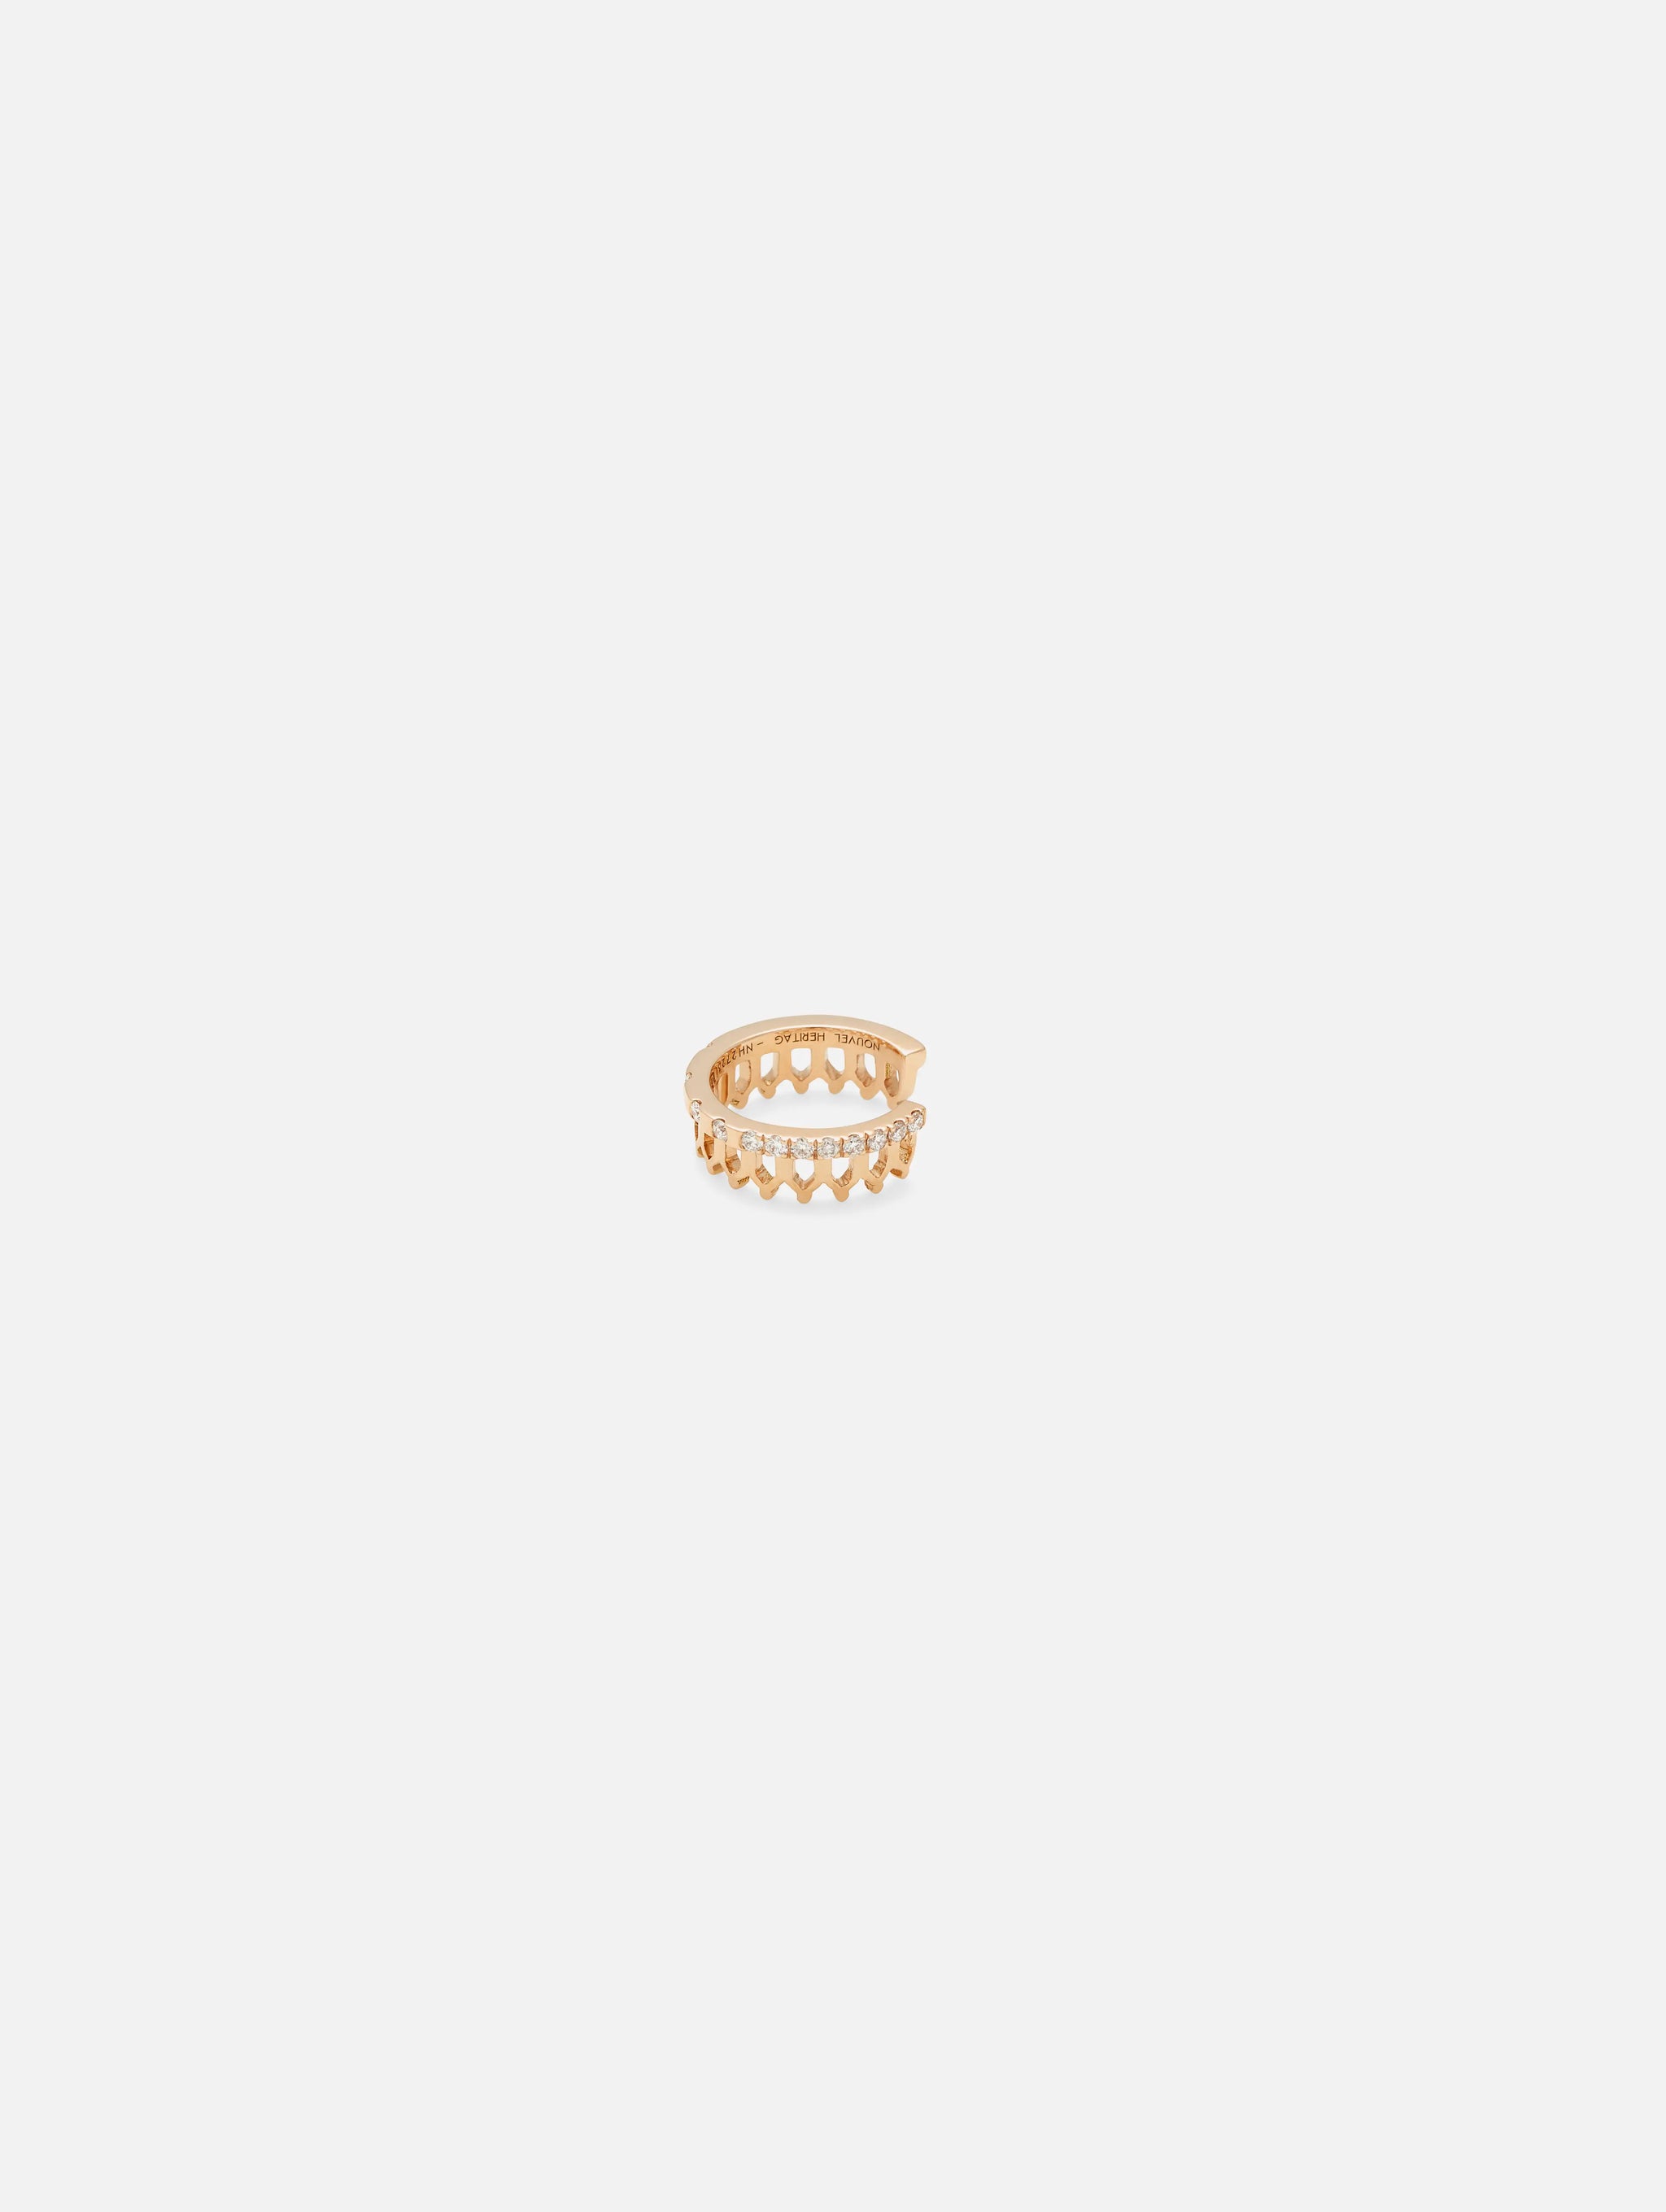 Simple Some Diamond Ear Cuff in Rose Gold - 1 - Nouvel Heritage